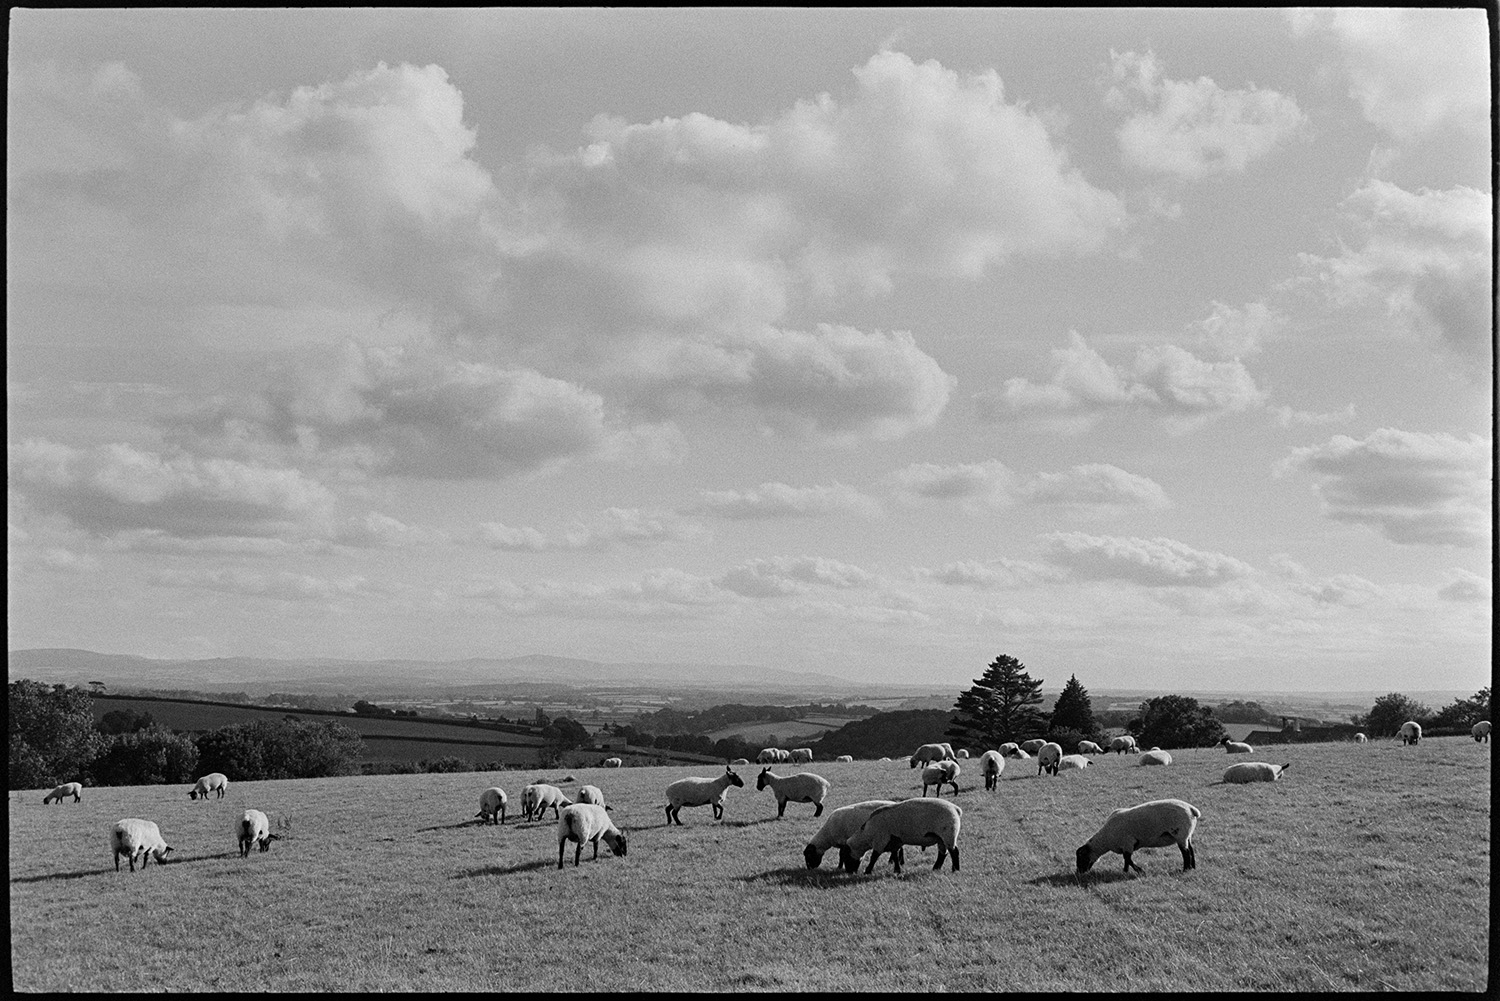 Sheep in cloudy landscape. 
[Sheep grazing in a field at Berry, Iddesleigh. A landscape with trees, hedgerows, fields and clouds can be seen in the background.]